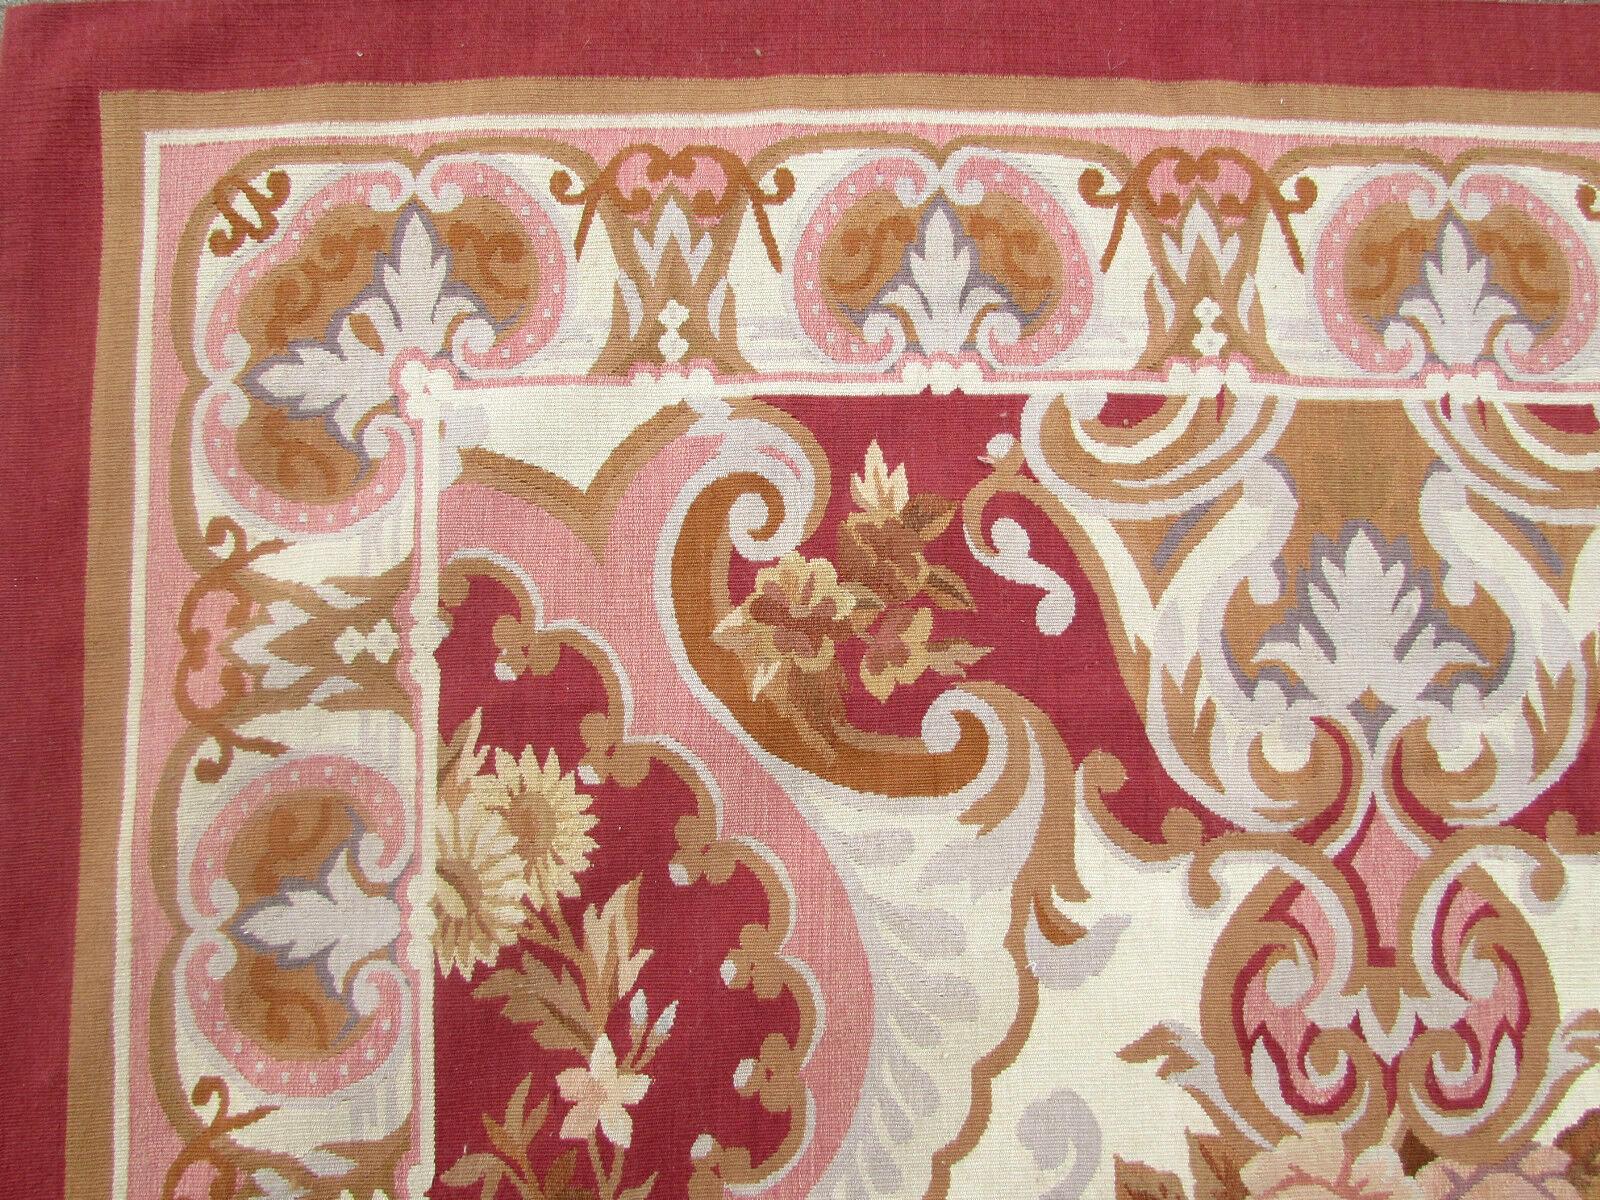 Late 20th Century Handmade Vintage French Aubusson Rug 8.9' x 12', 1980s, 1Q37 For Sale